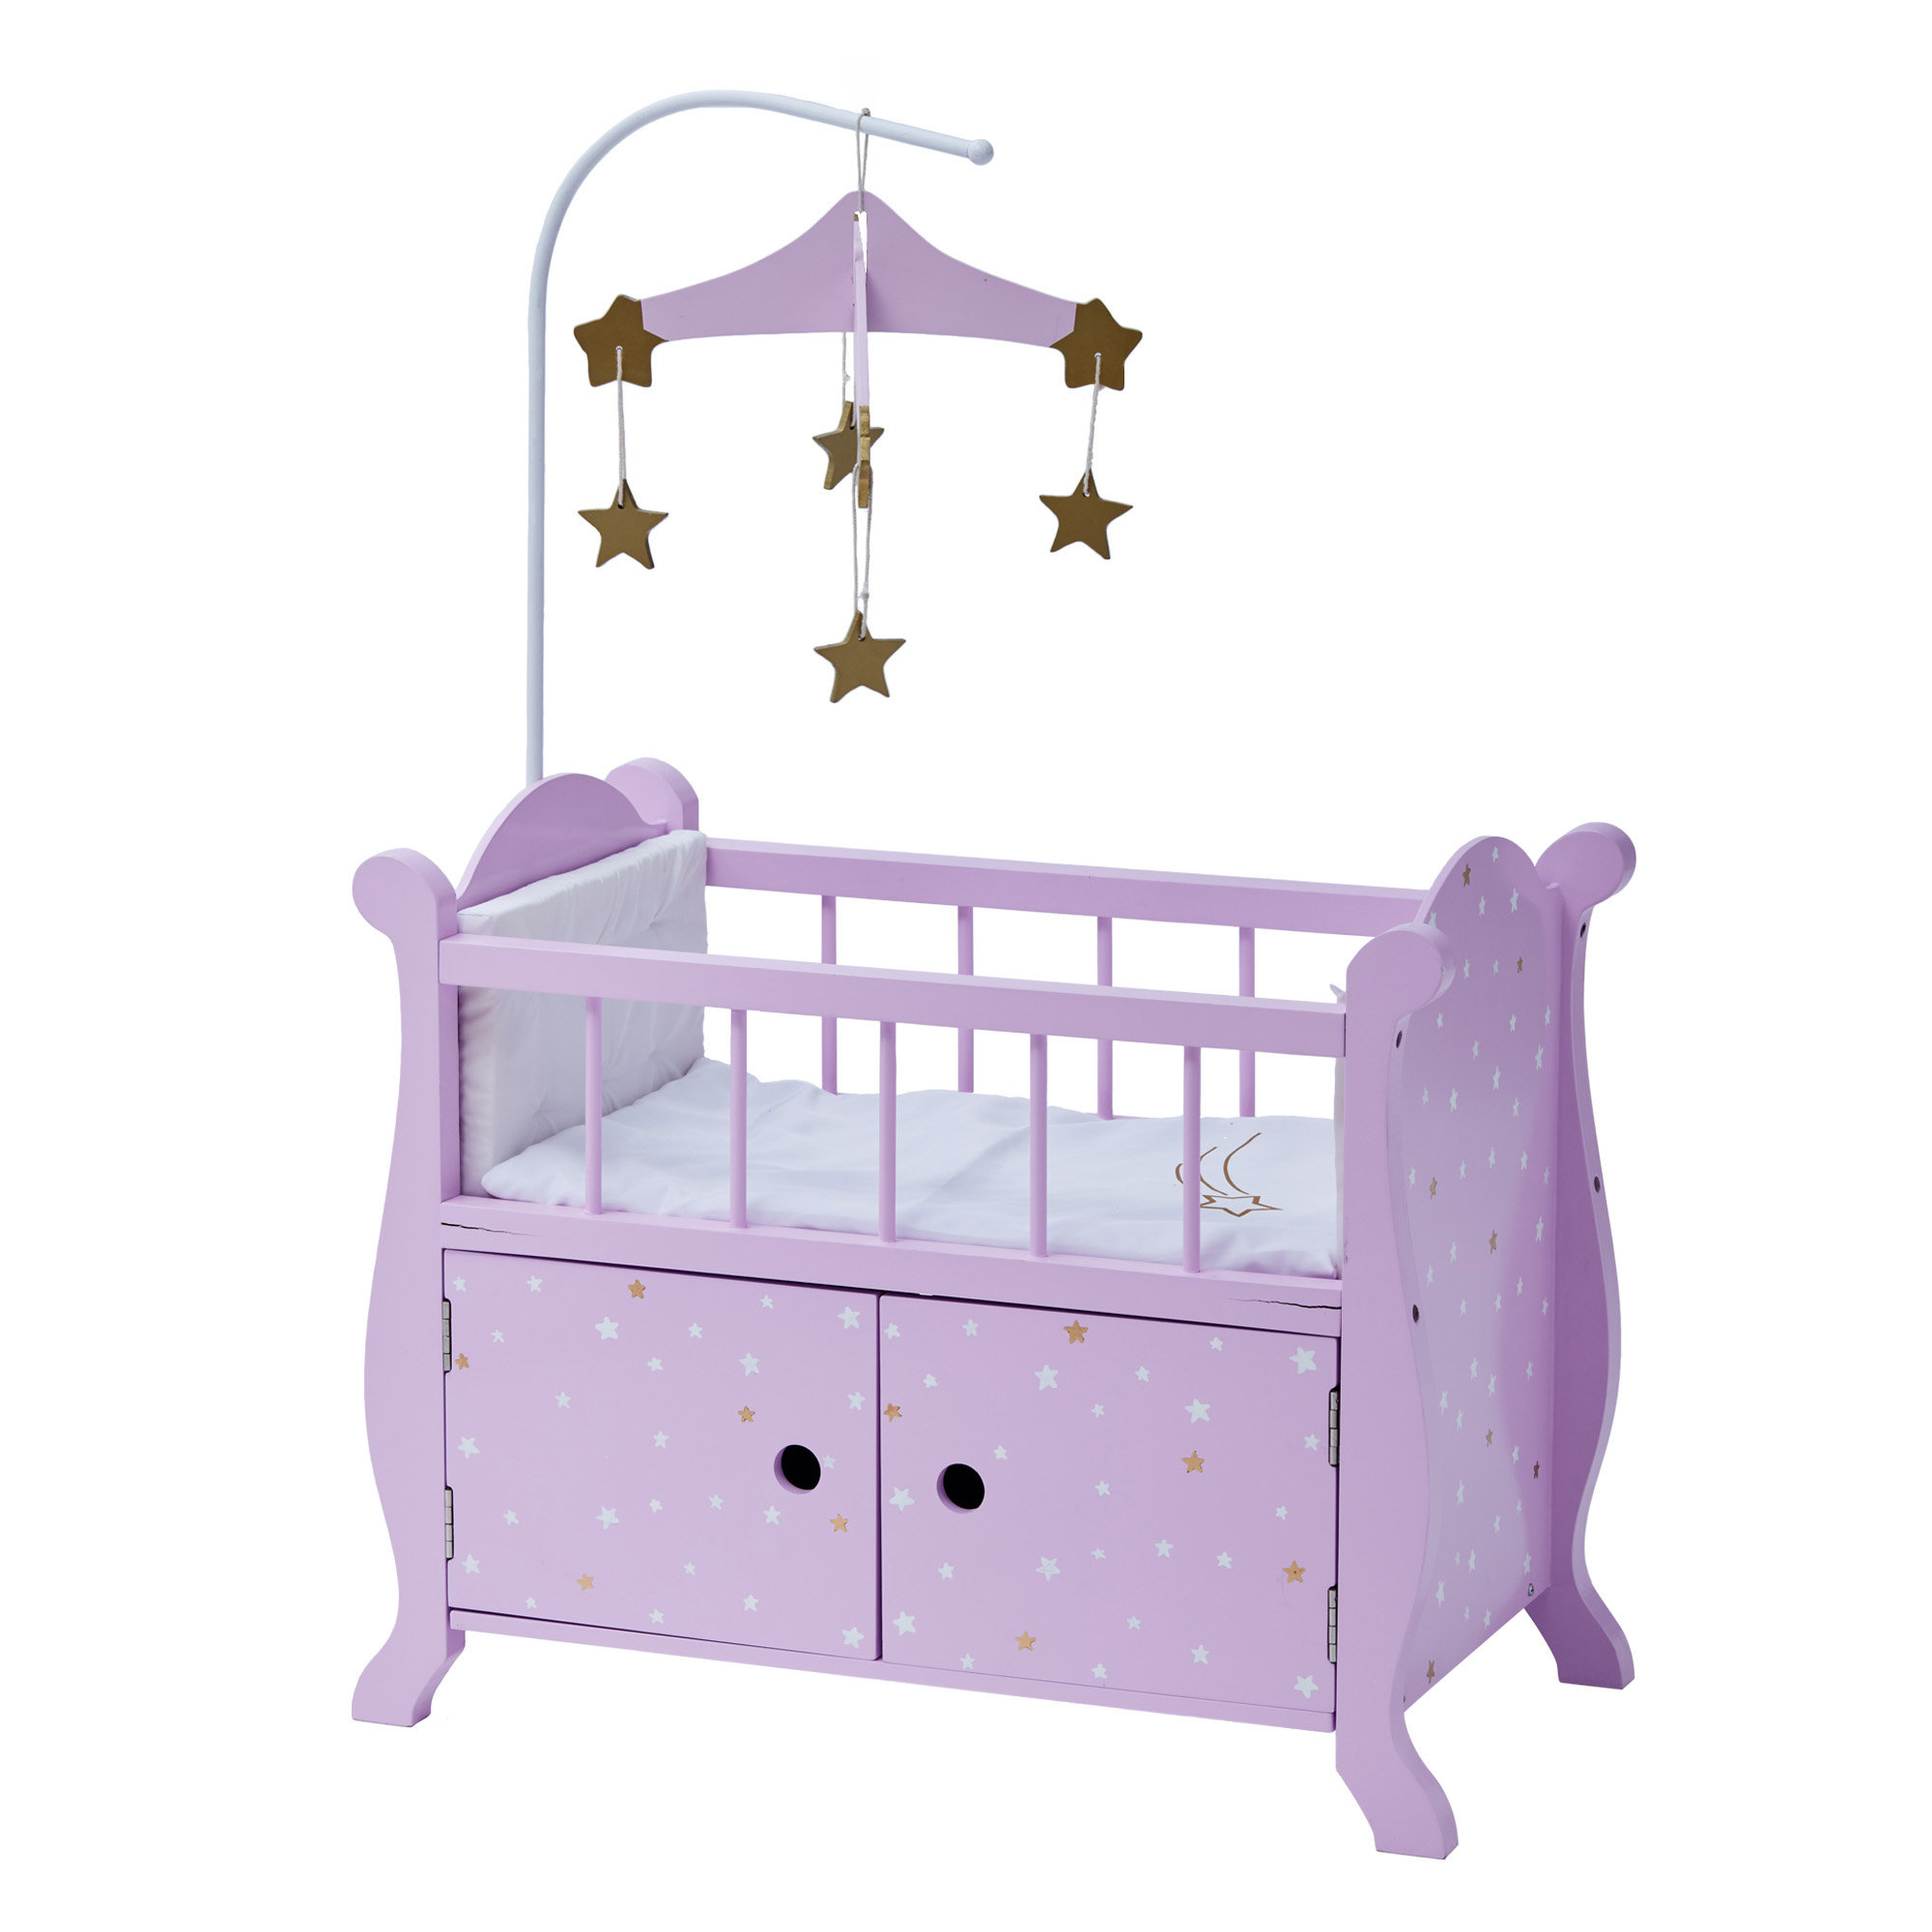 Purple//Gold Olivia/'s Little World 18 Doll Furniture Trundle Bed 21.5 x 10.5 x 10.5